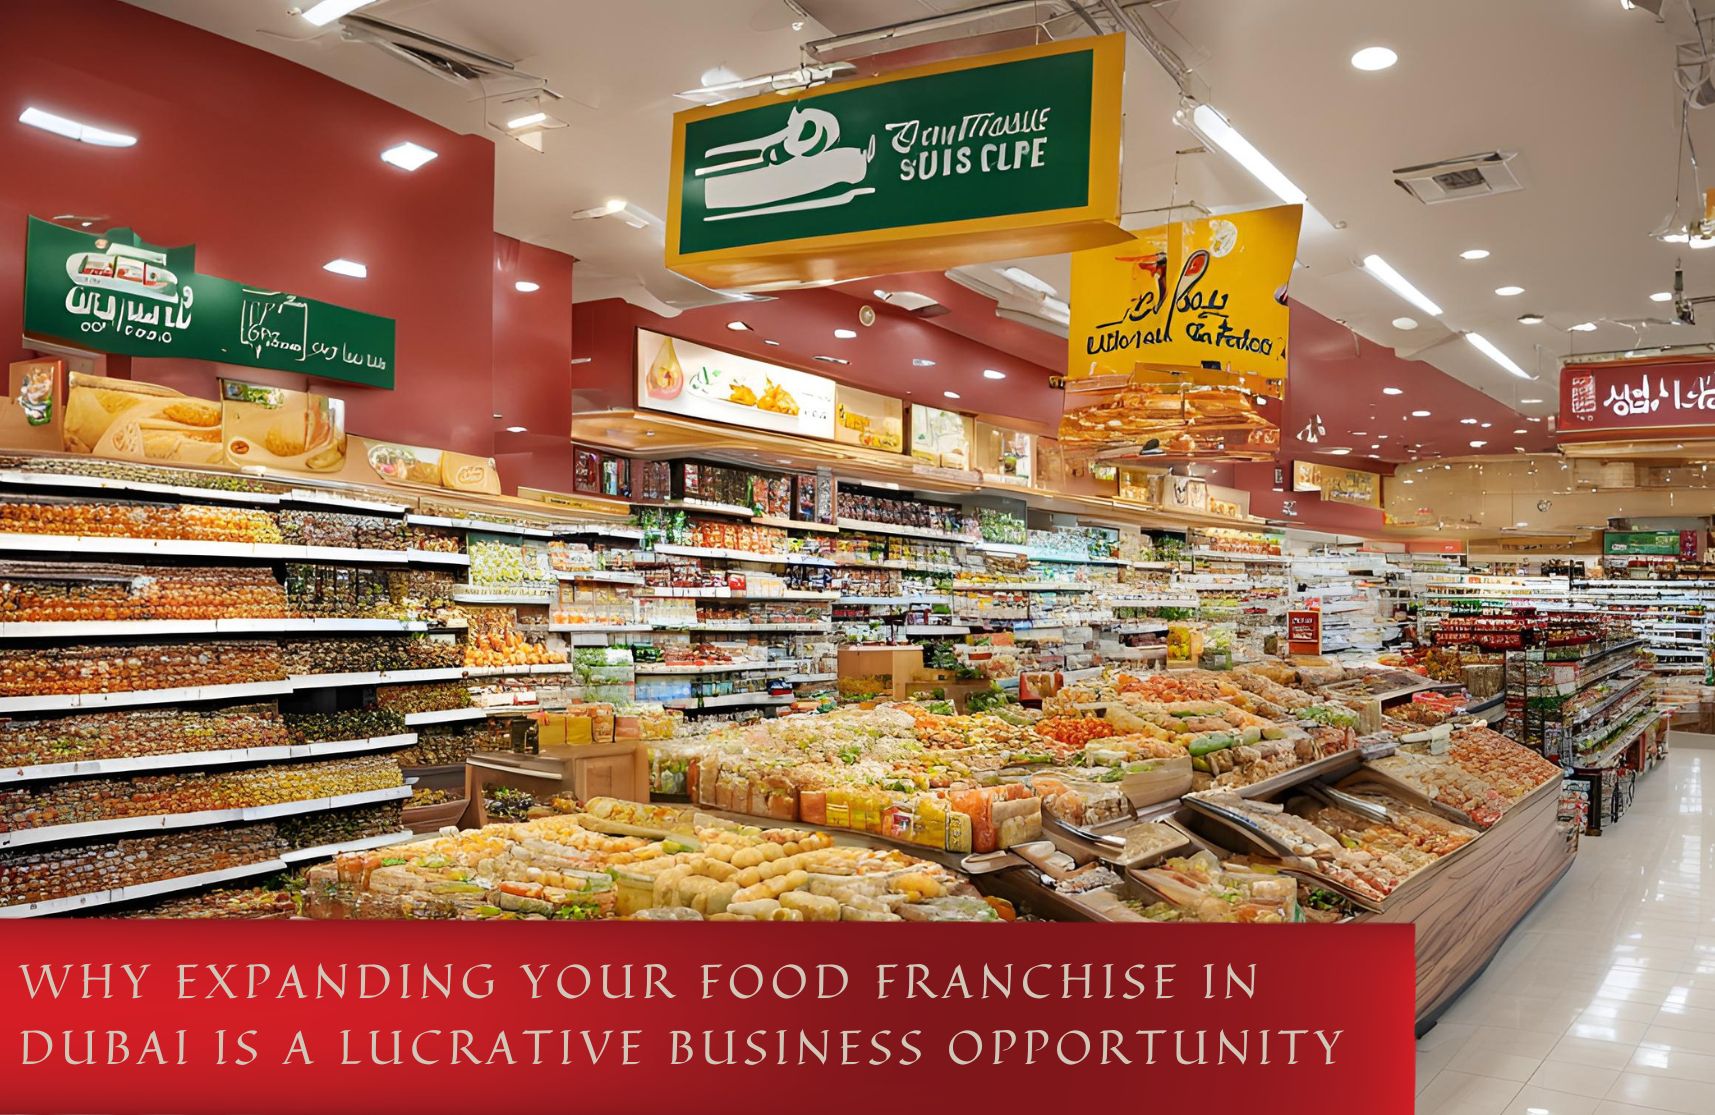 Why Expanding Your Food Franchise in Dubai is a Lucrative Business Opportunity